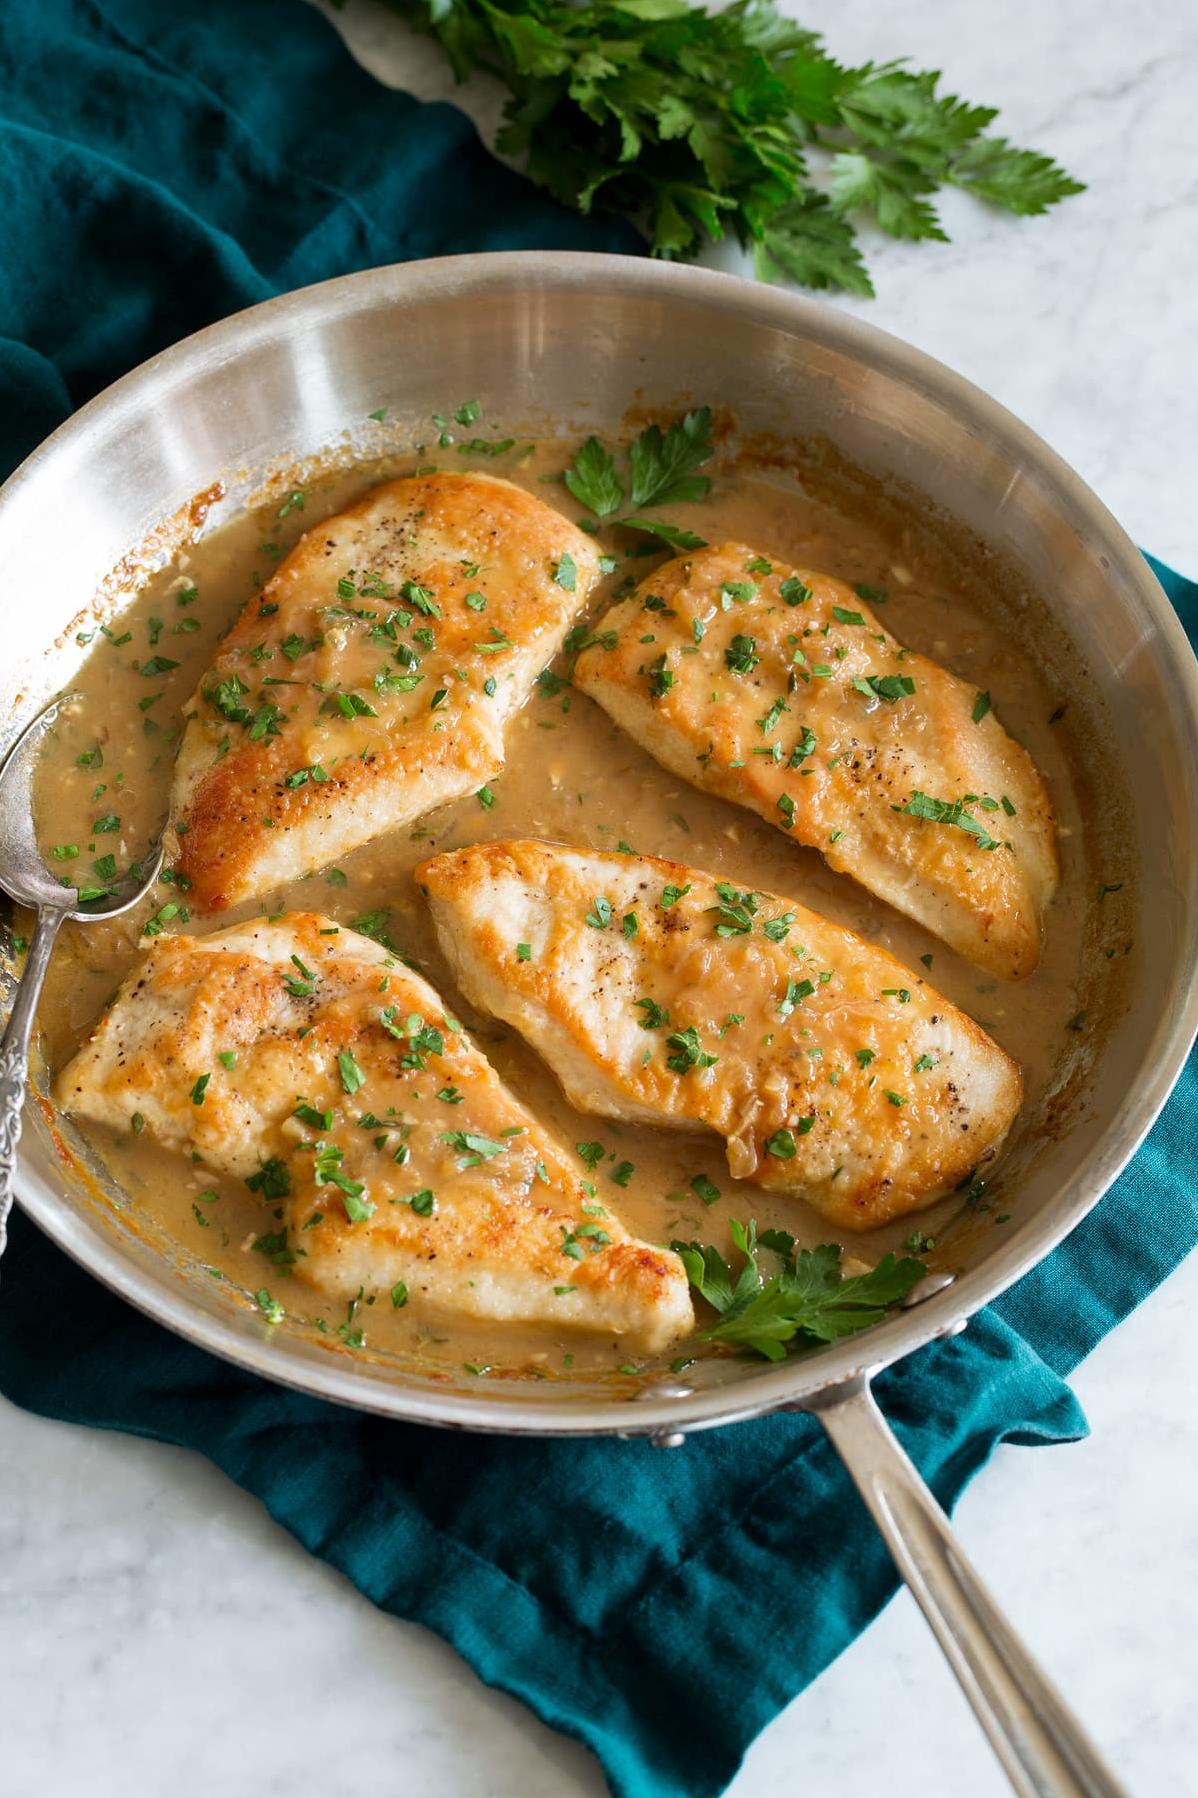 Juicy and Tender: Roasted Chicken in White Wine Sauce